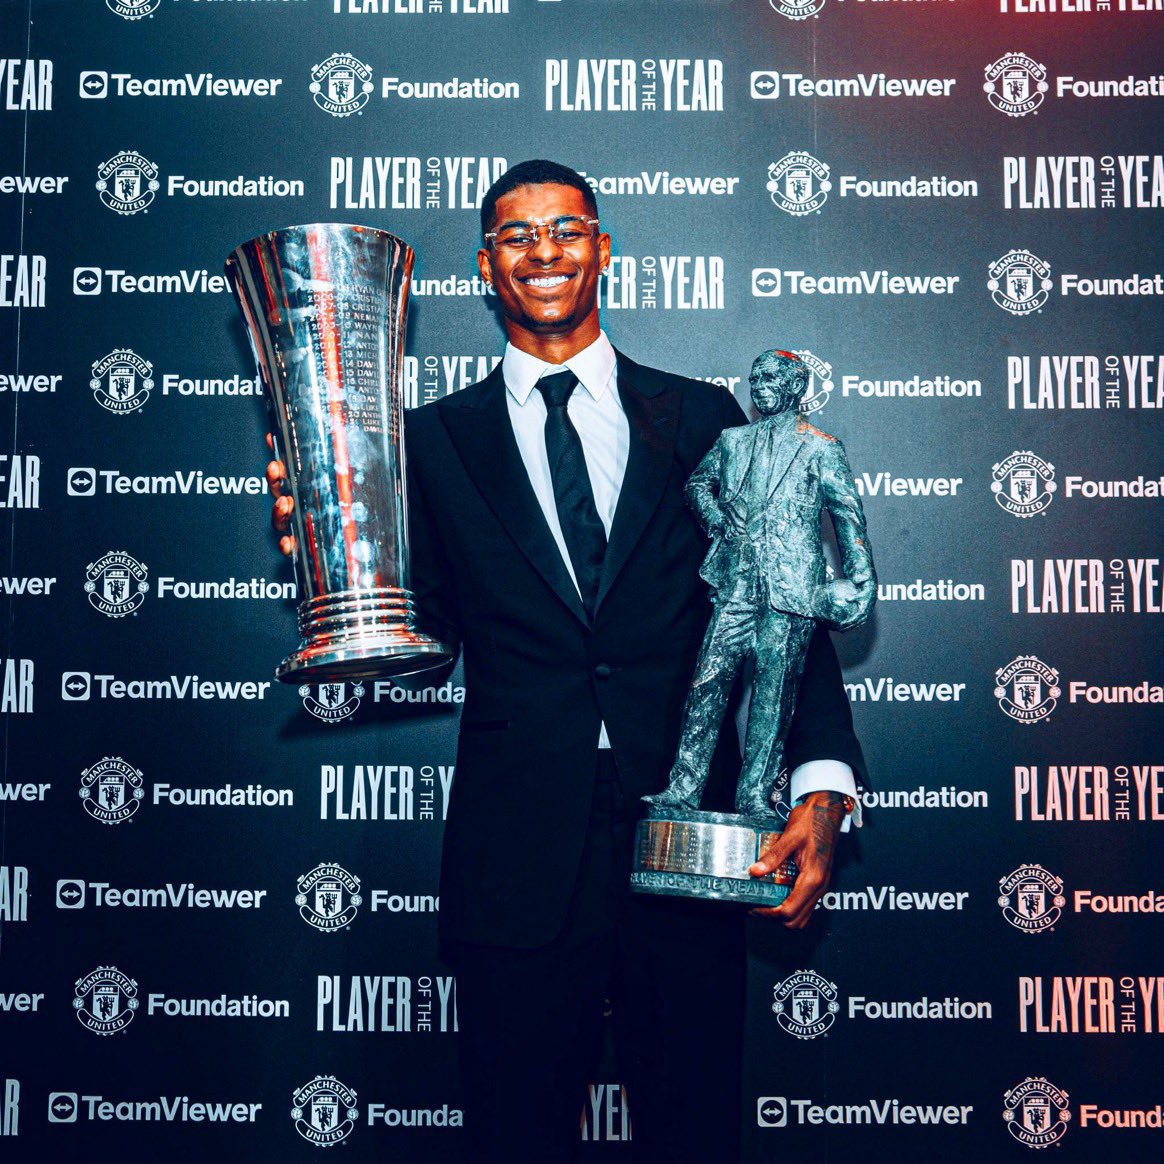 To think Marcus Rashford did all these last season and didn’t get a ballon d’or nomination will always be crazy to me. I’ll never forgive and forget